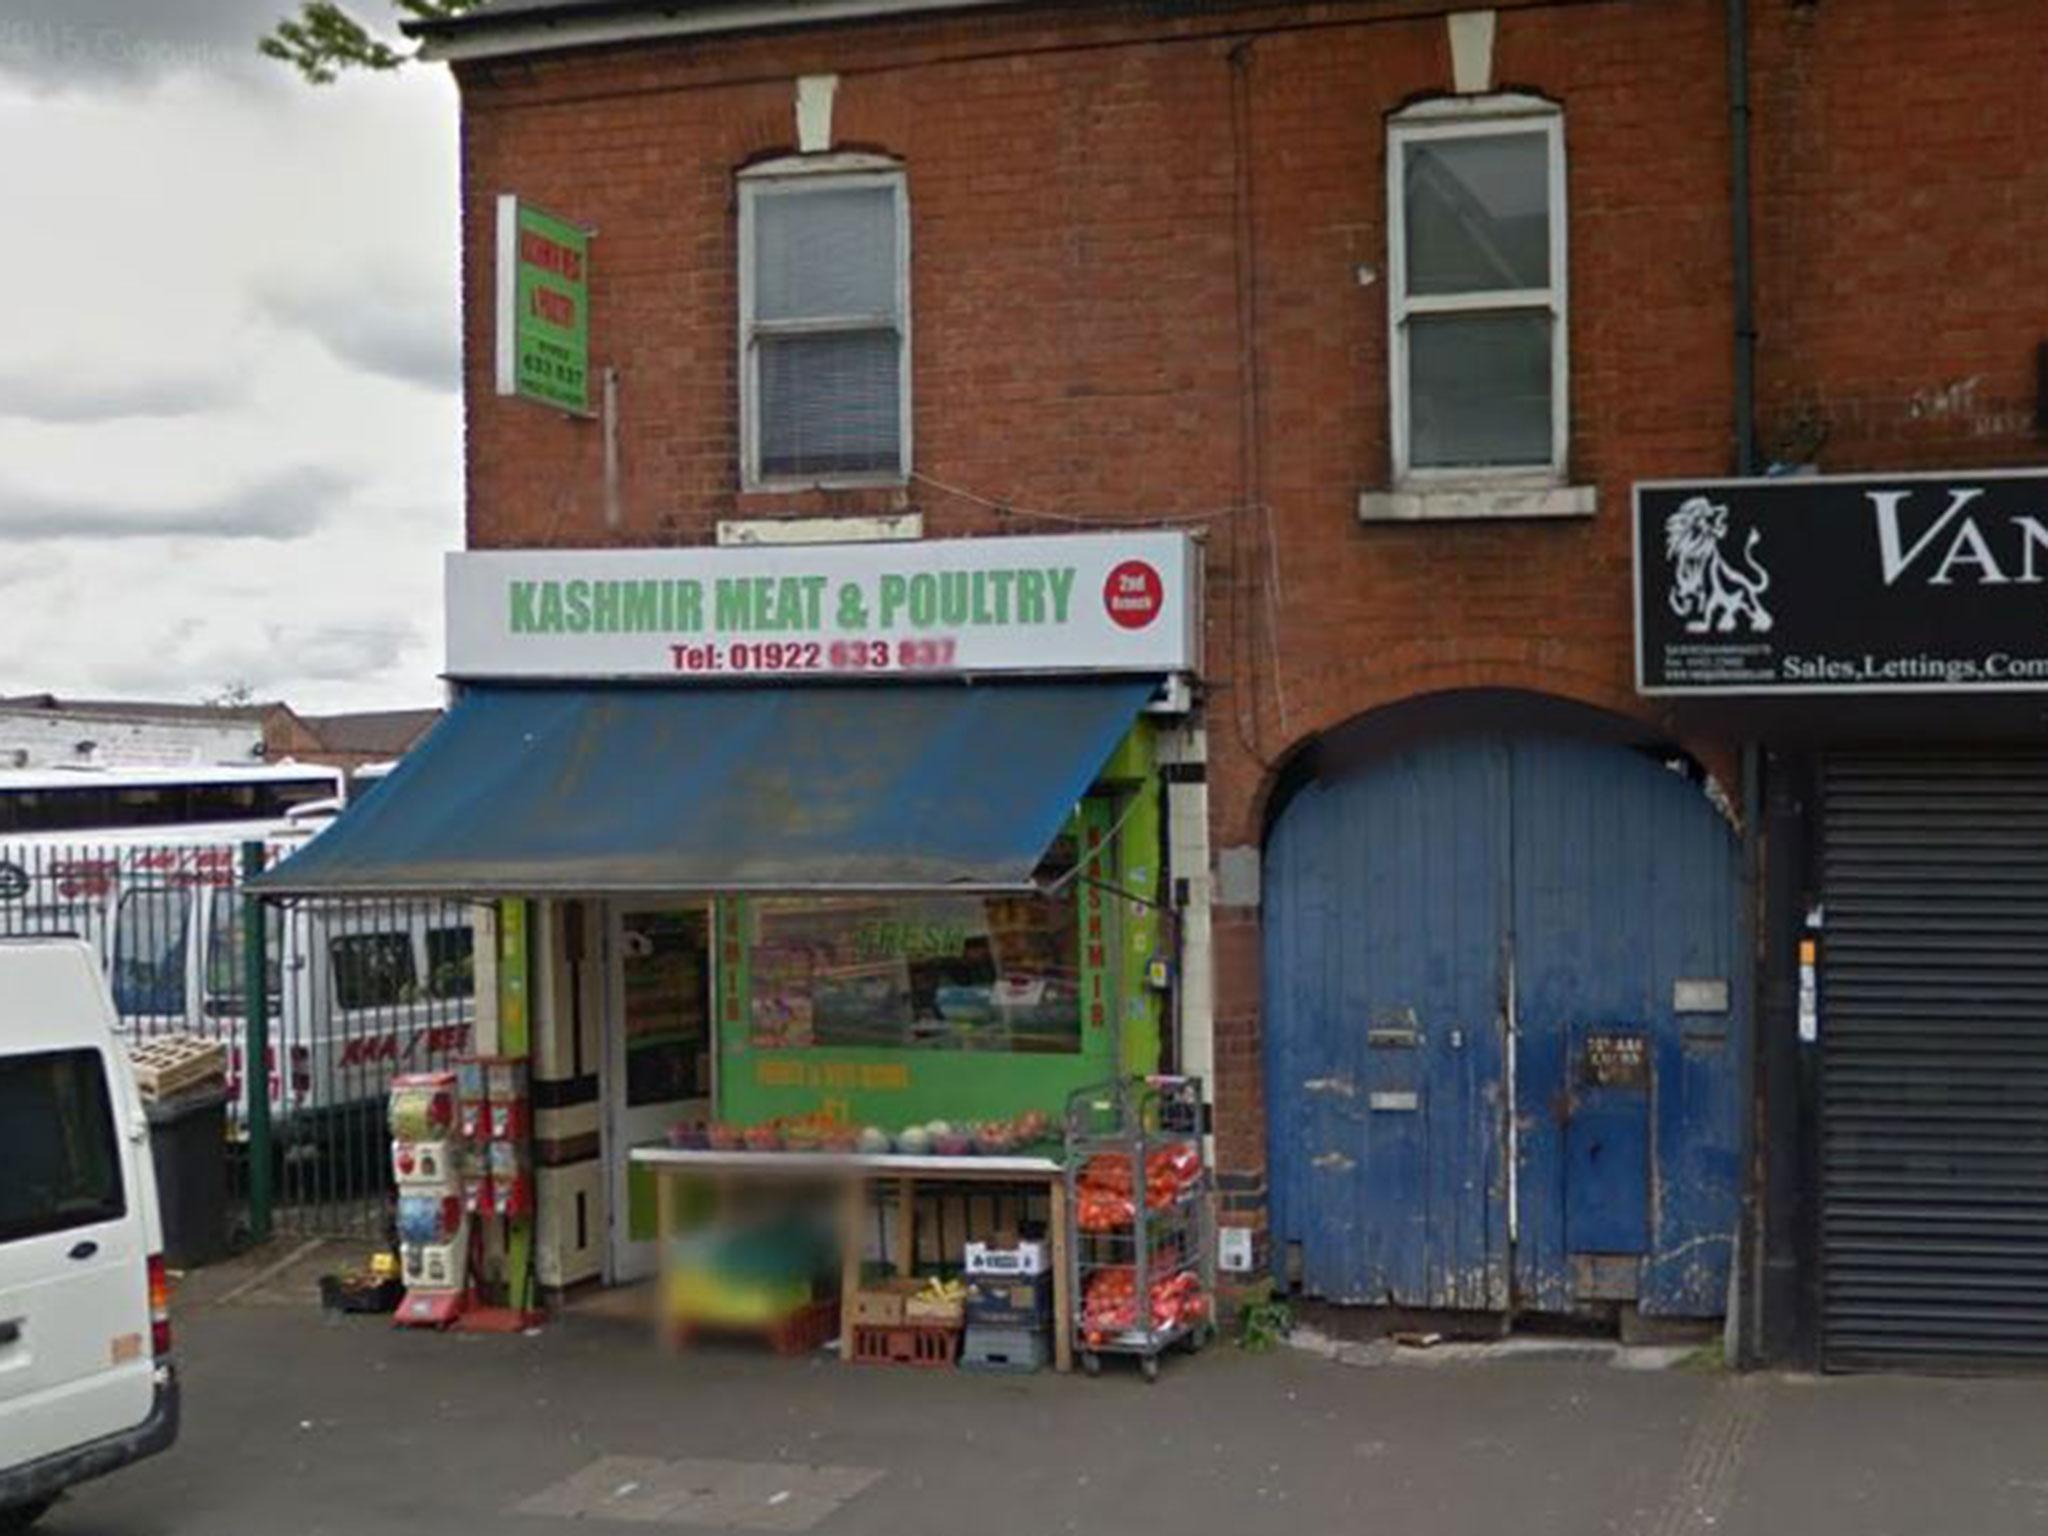 Kashmir Meat & Poultry in Wednesbury Road, Walsall, West Midlands, was left badly damaged after the man threw a lit bottle of "accelerant" at a staff member around 5.25pm on Monday